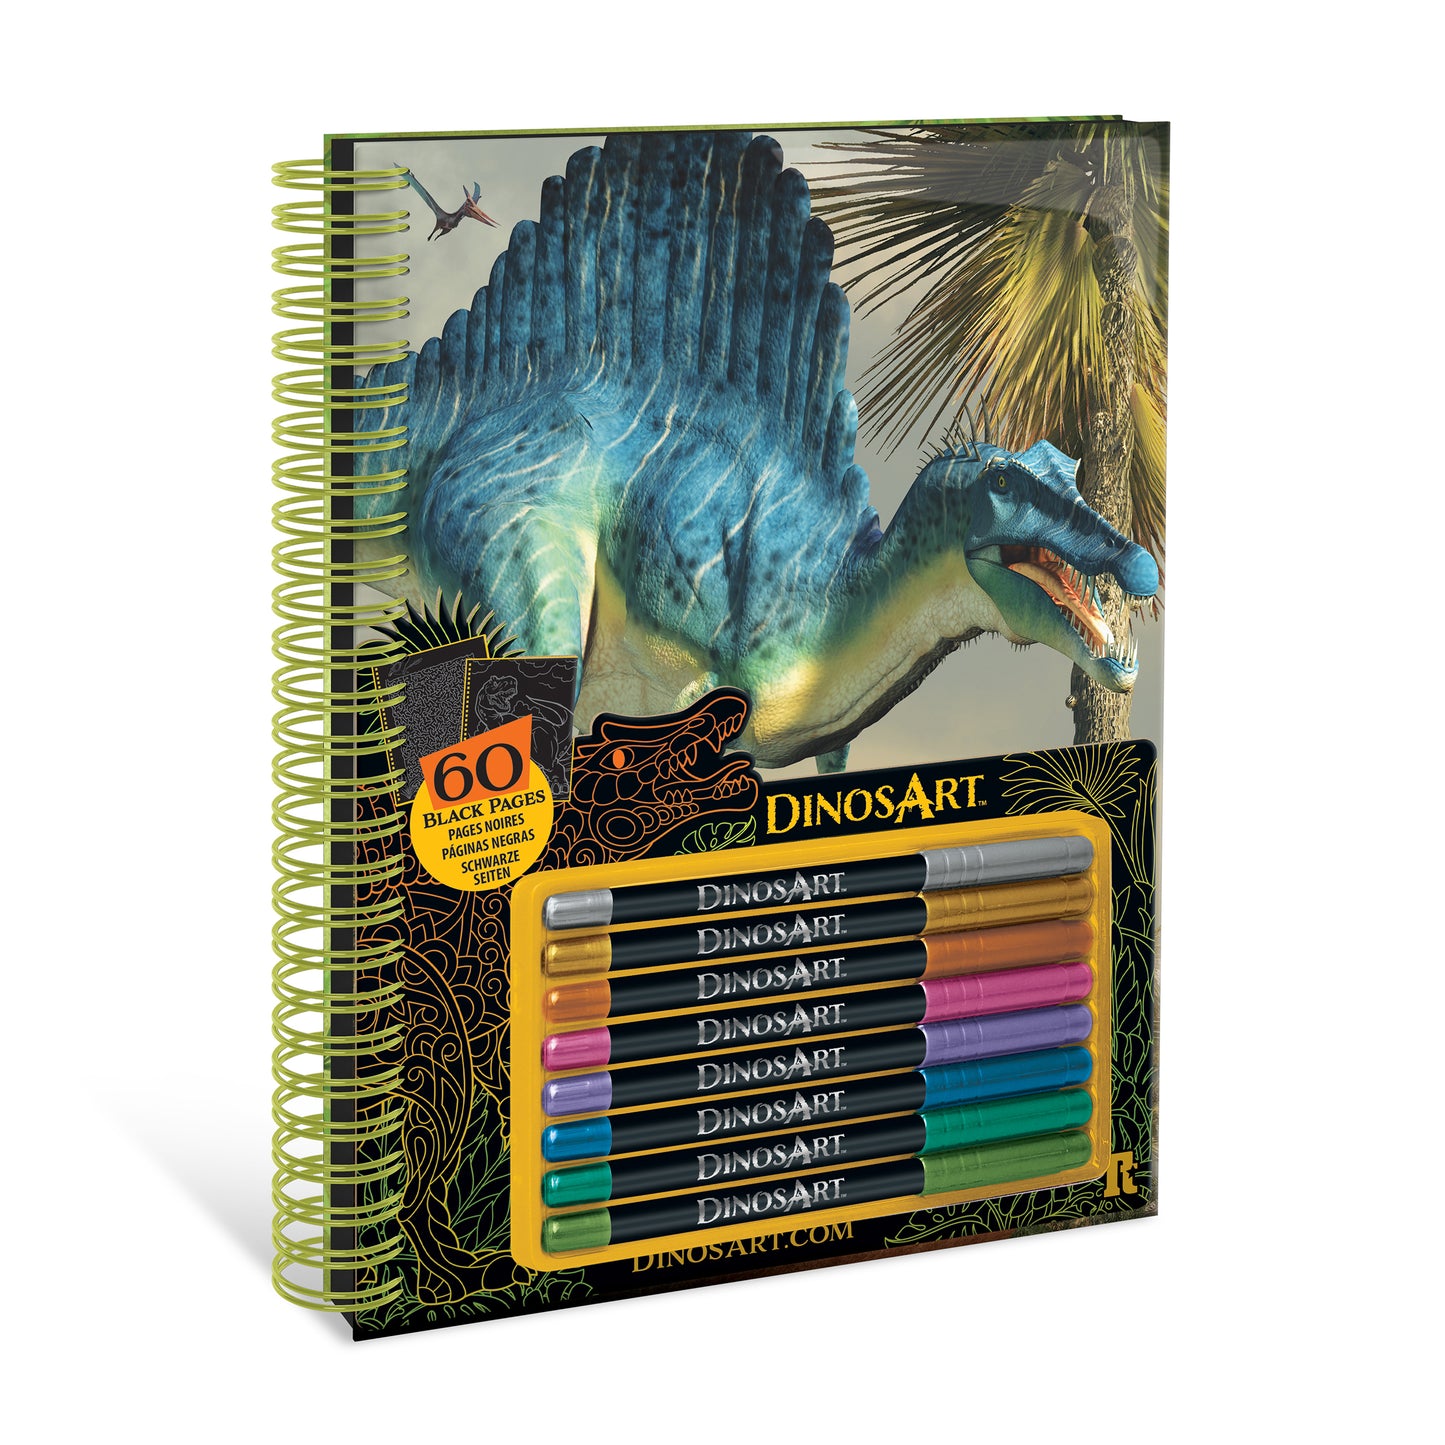 Dinosart Black Pages Coloring Book